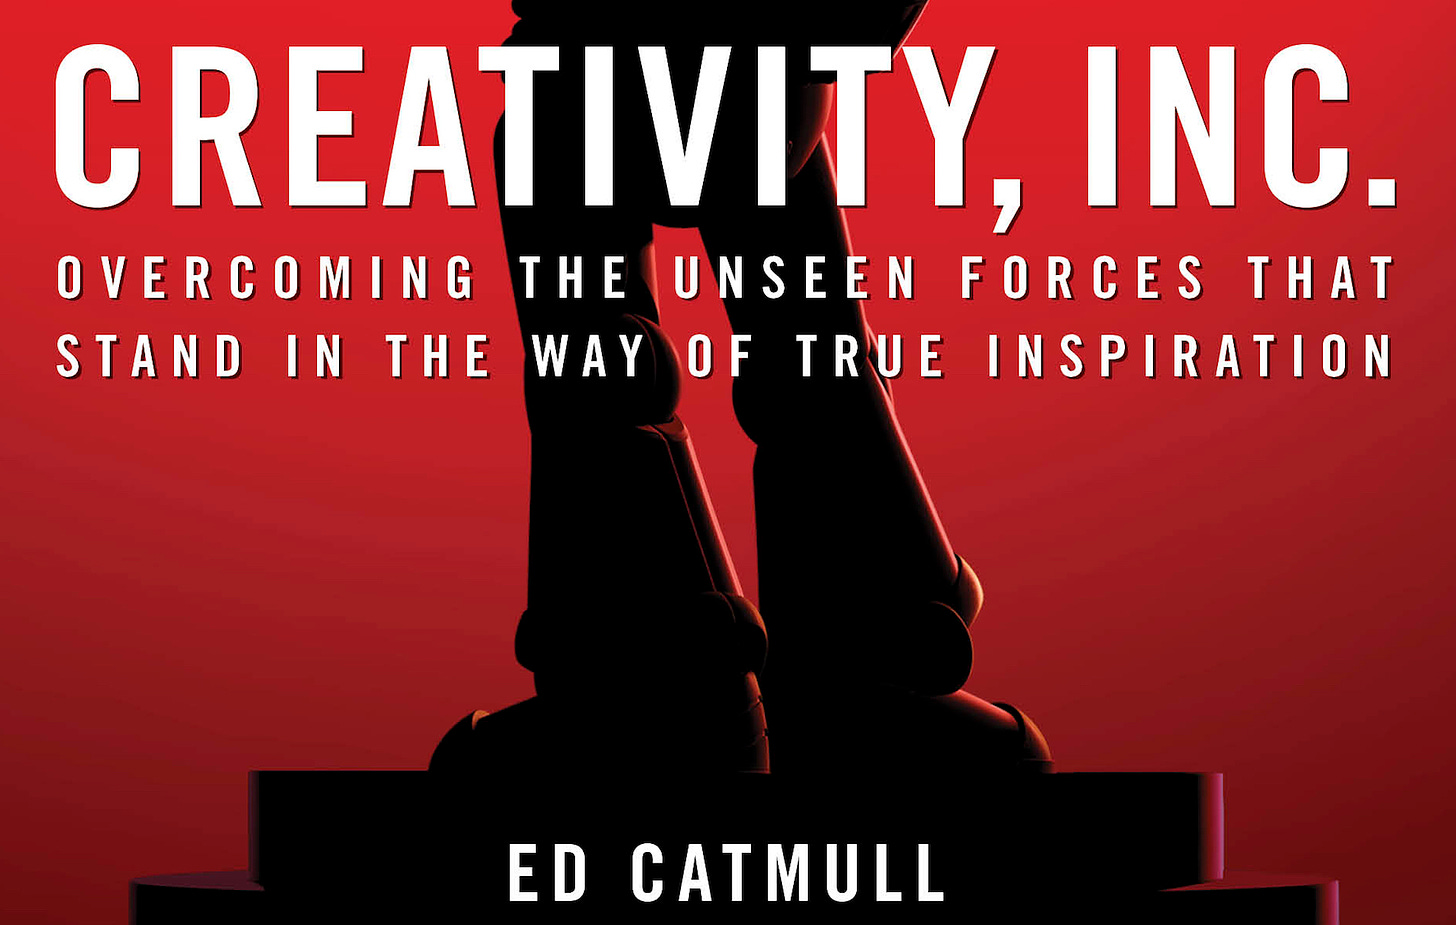 The 40 Best Quotes from "Creativity, Inc."